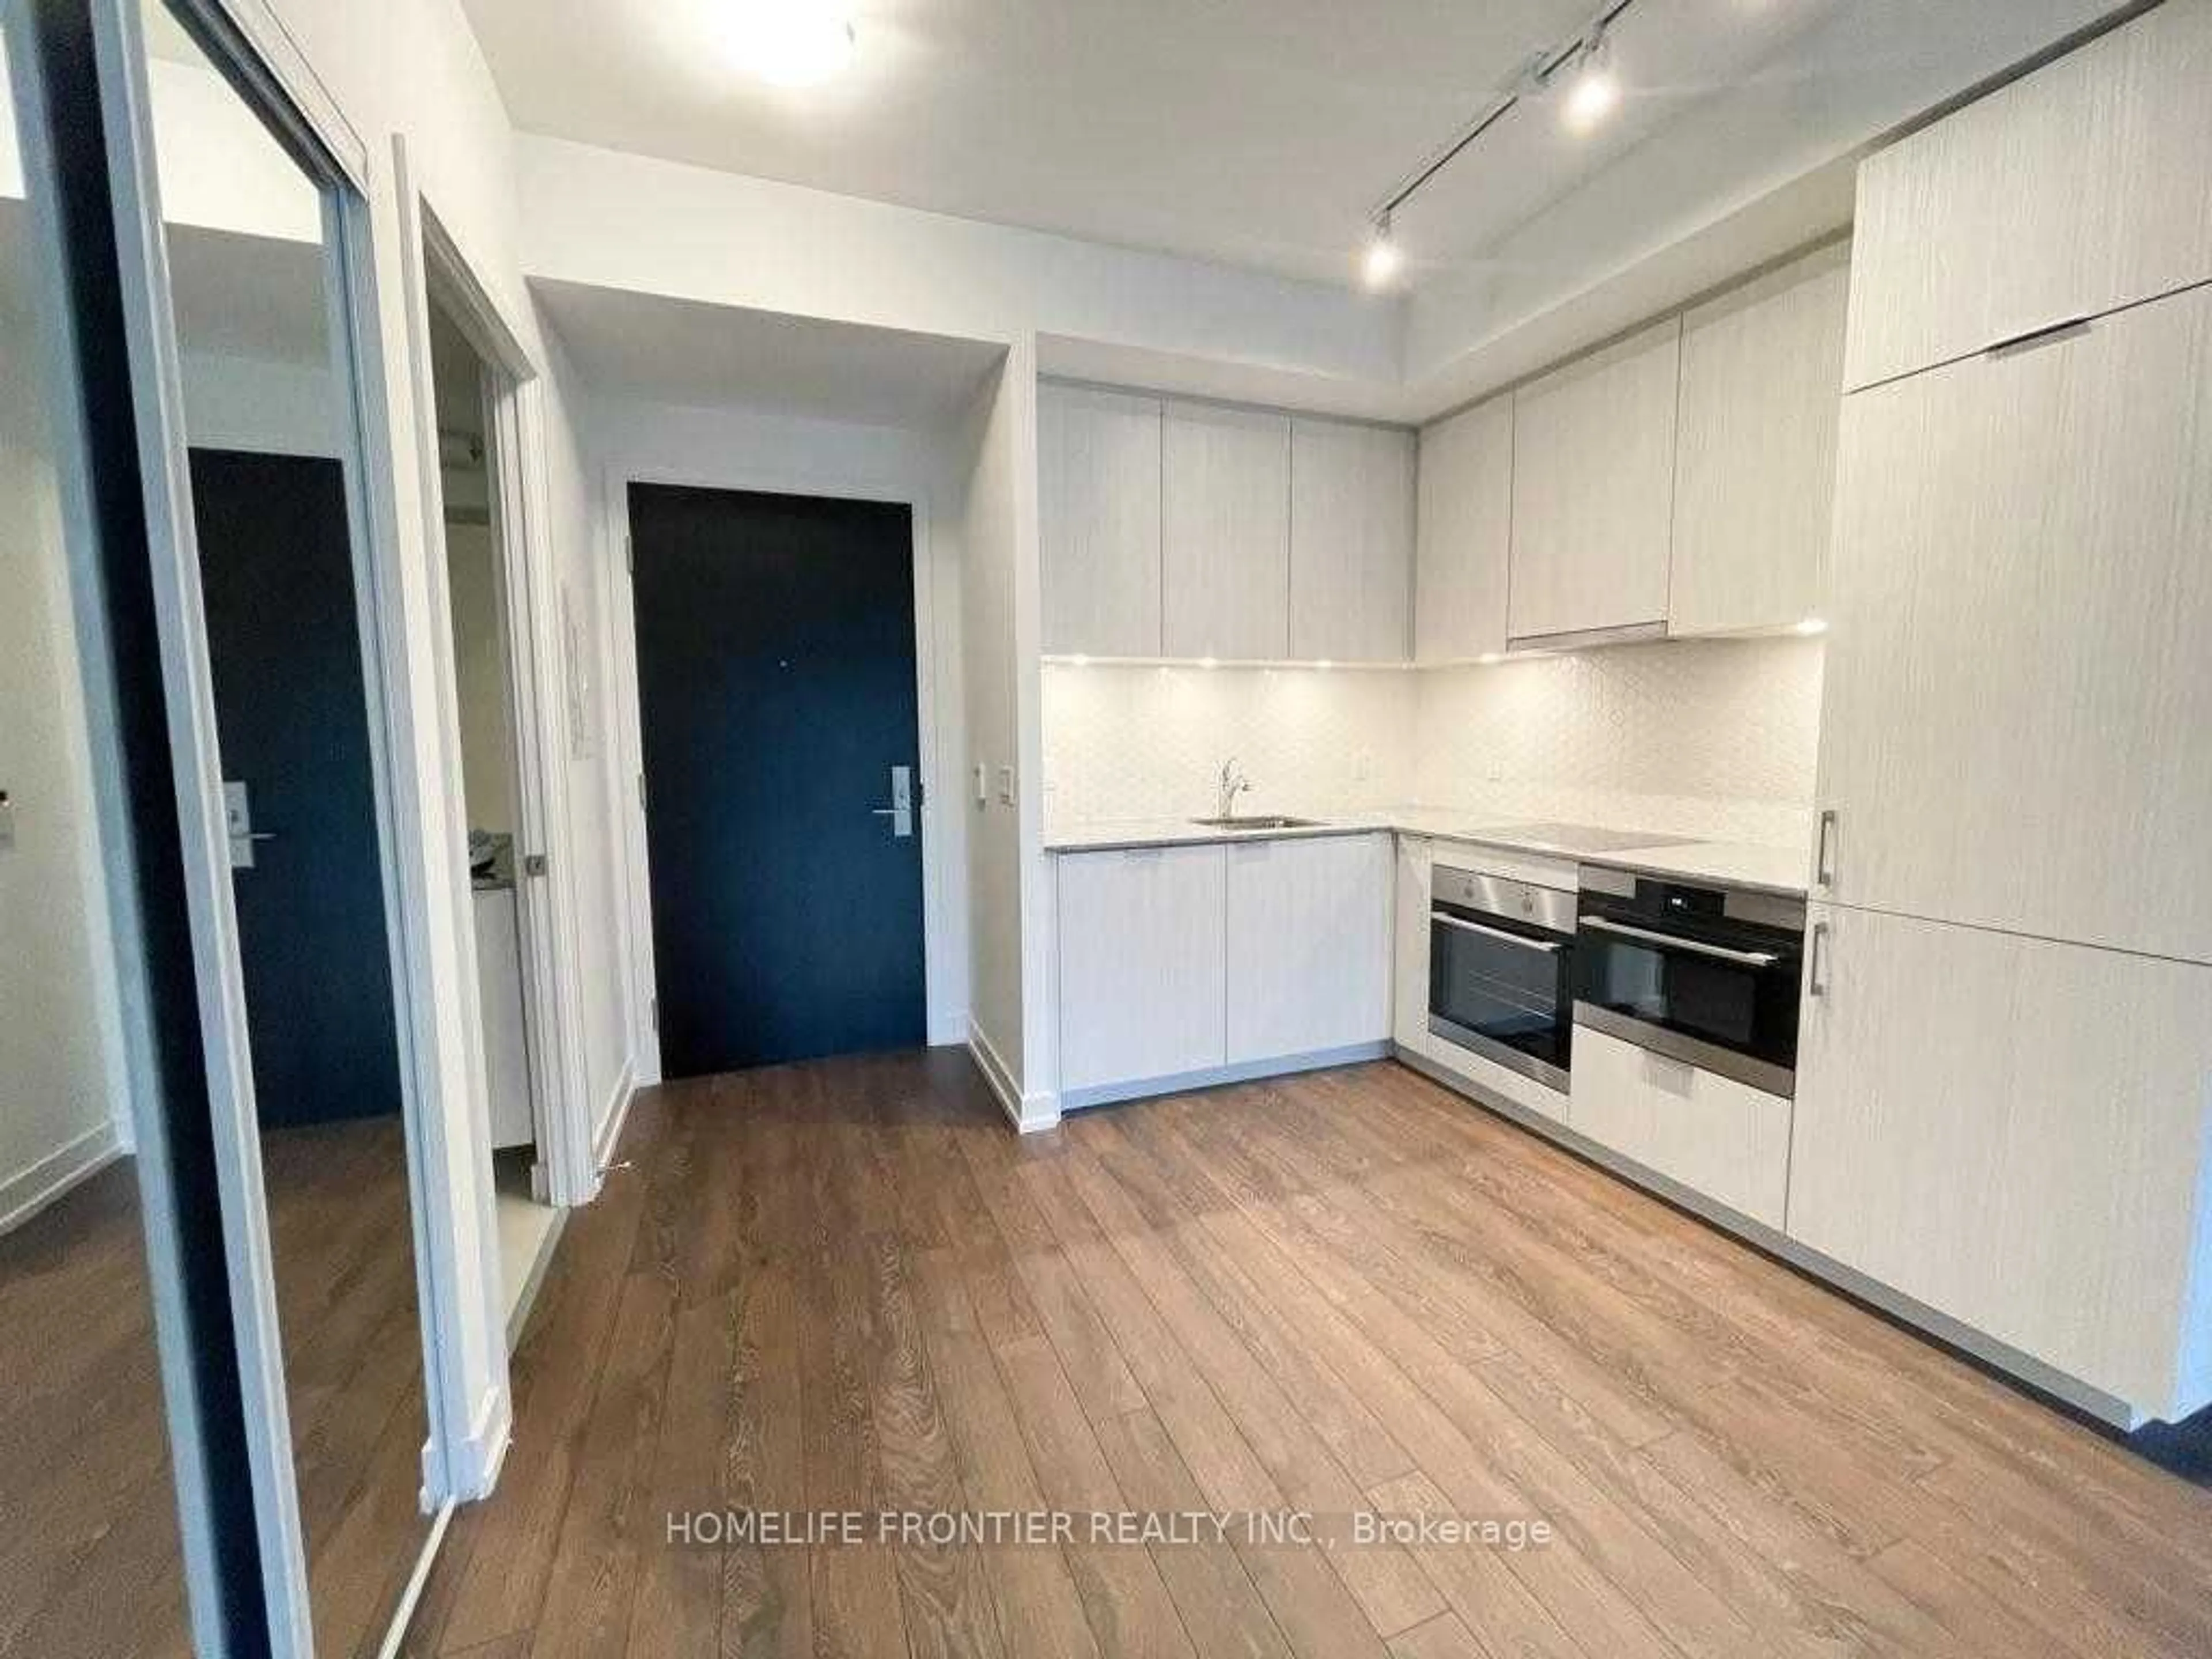 Standard kitchen for 158 Front St #411, Toronto Ontario M5A 0K9